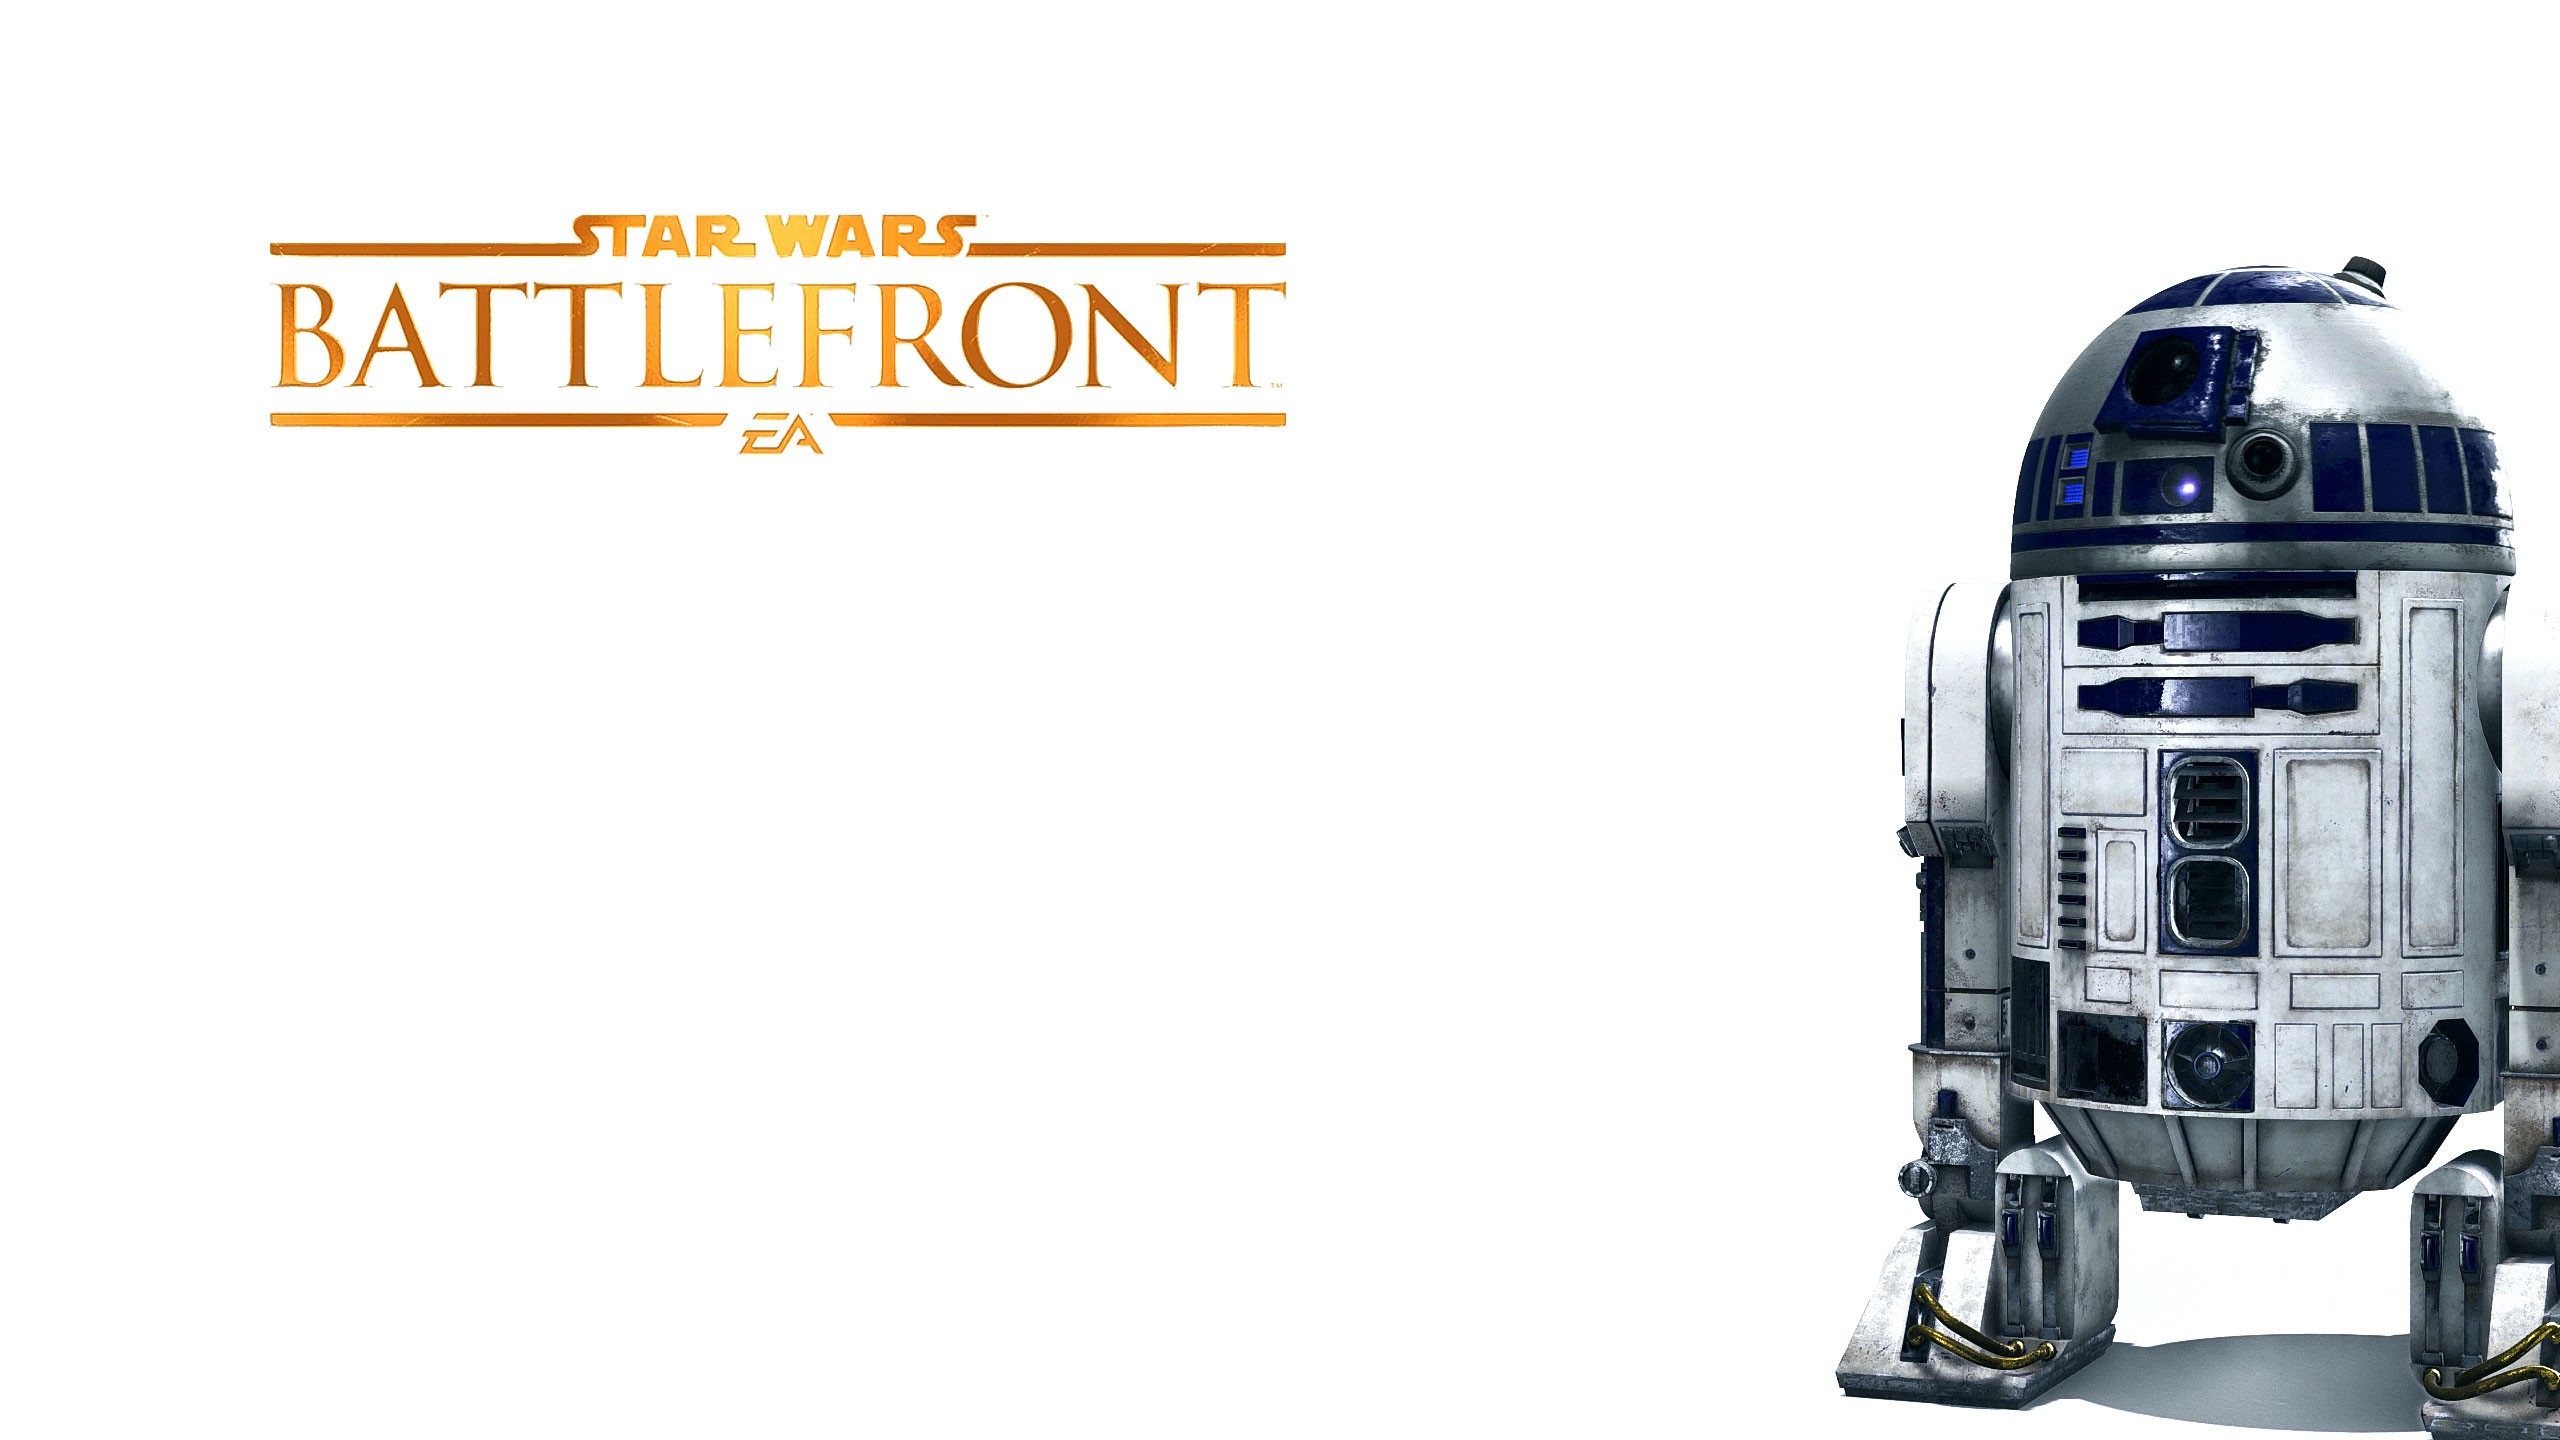 General 2560x1440 Star Wars: Battlefront R2-D2 video games simple background Star Wars Droids white background Star Wars PC gaming science fiction